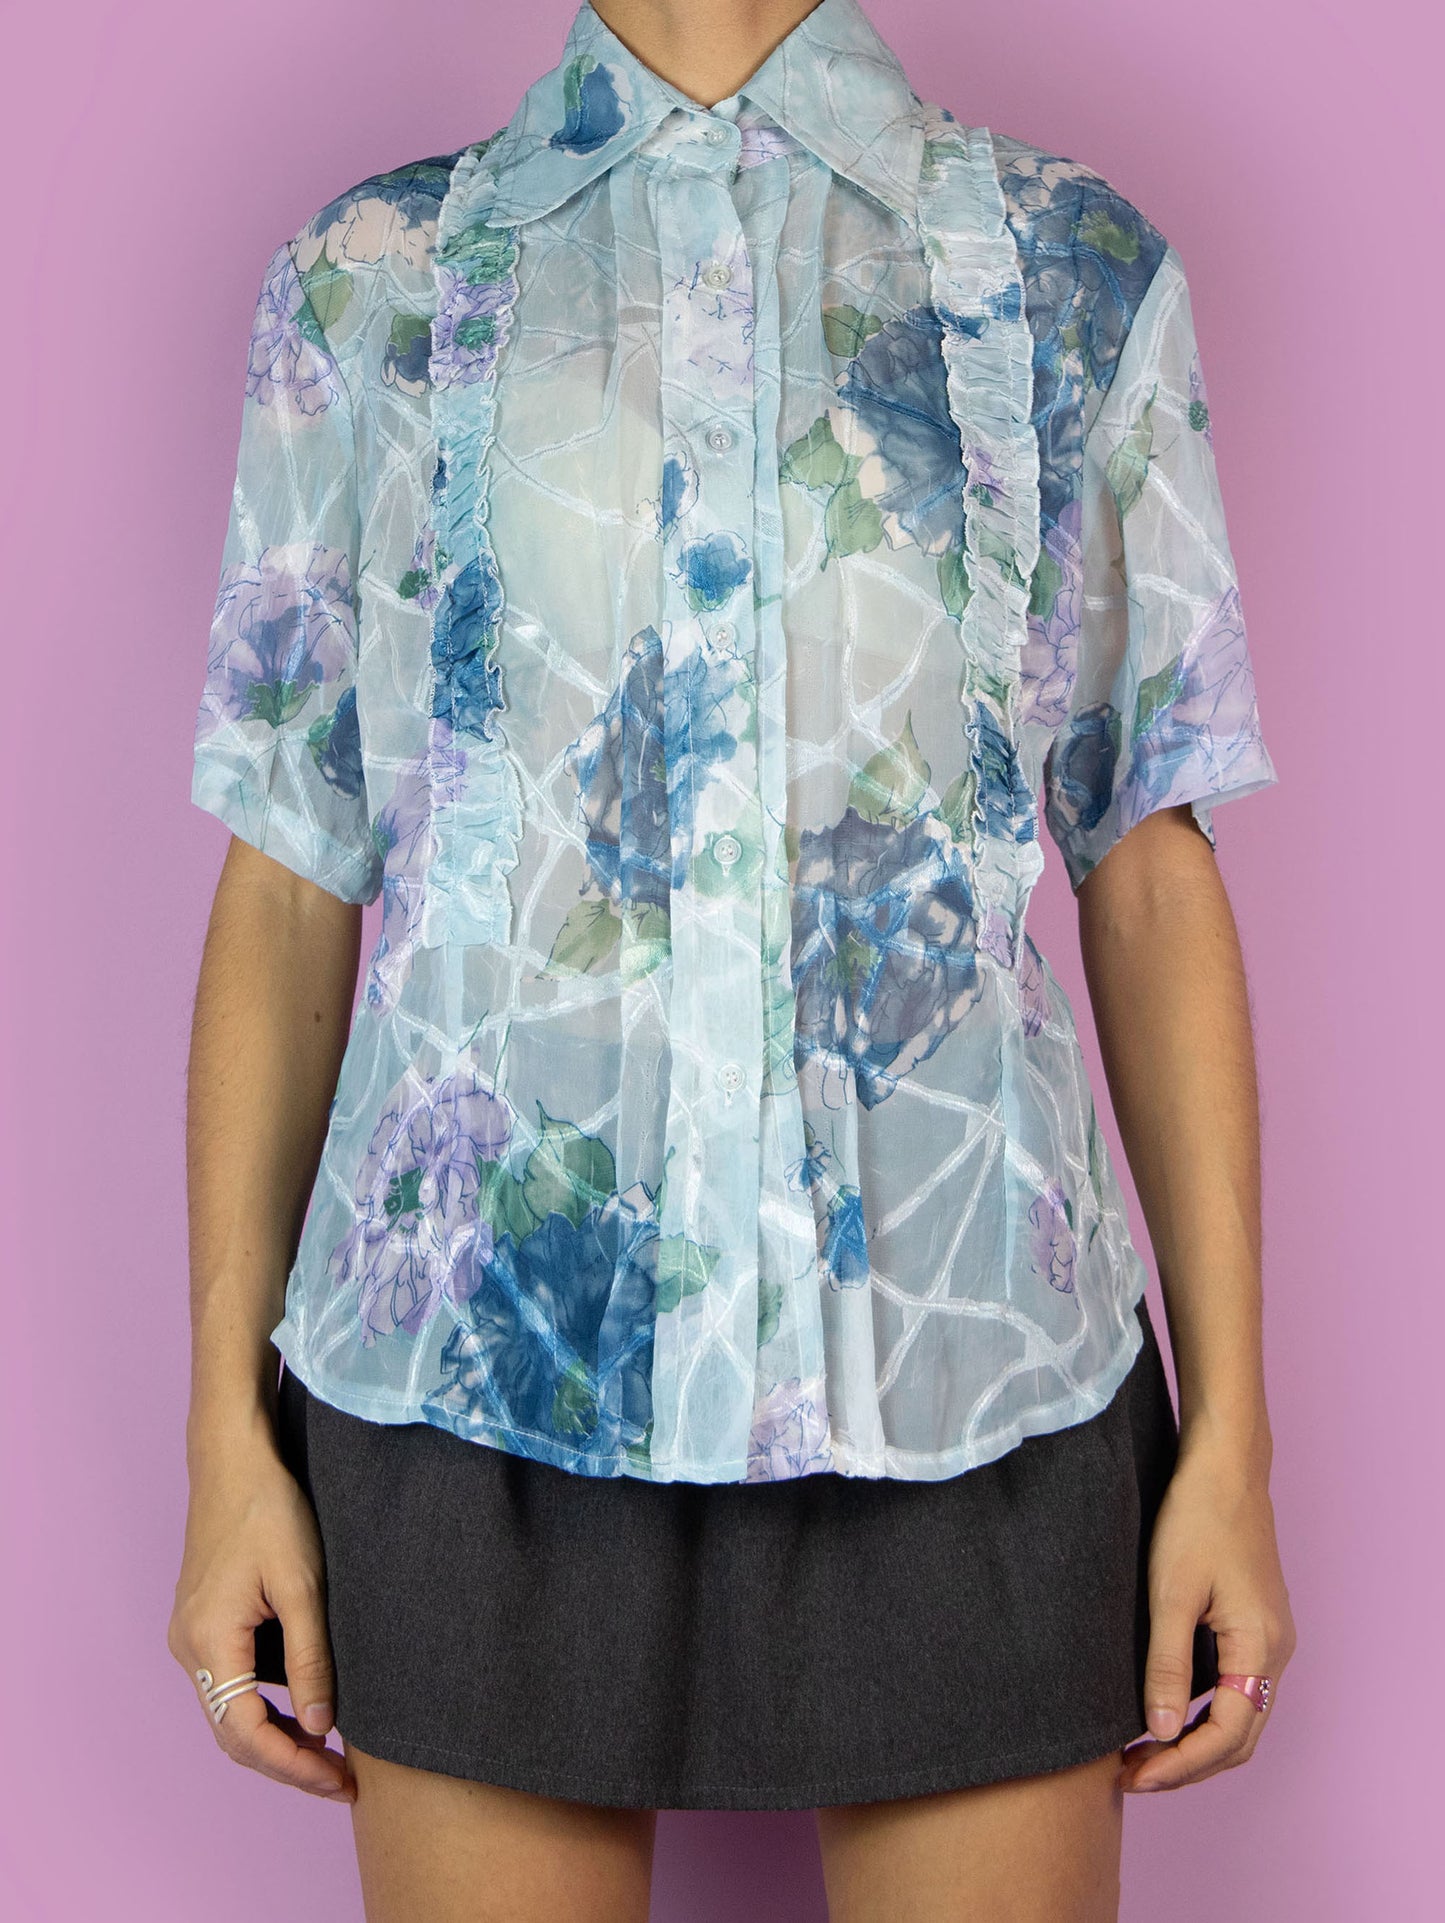 The Y2K Print Sheer Blouse is a vintage 2000s boho summer style light blue floral graphic semi-transparent short-sleeve top with a collar, buttons, and gathered ruffle details.